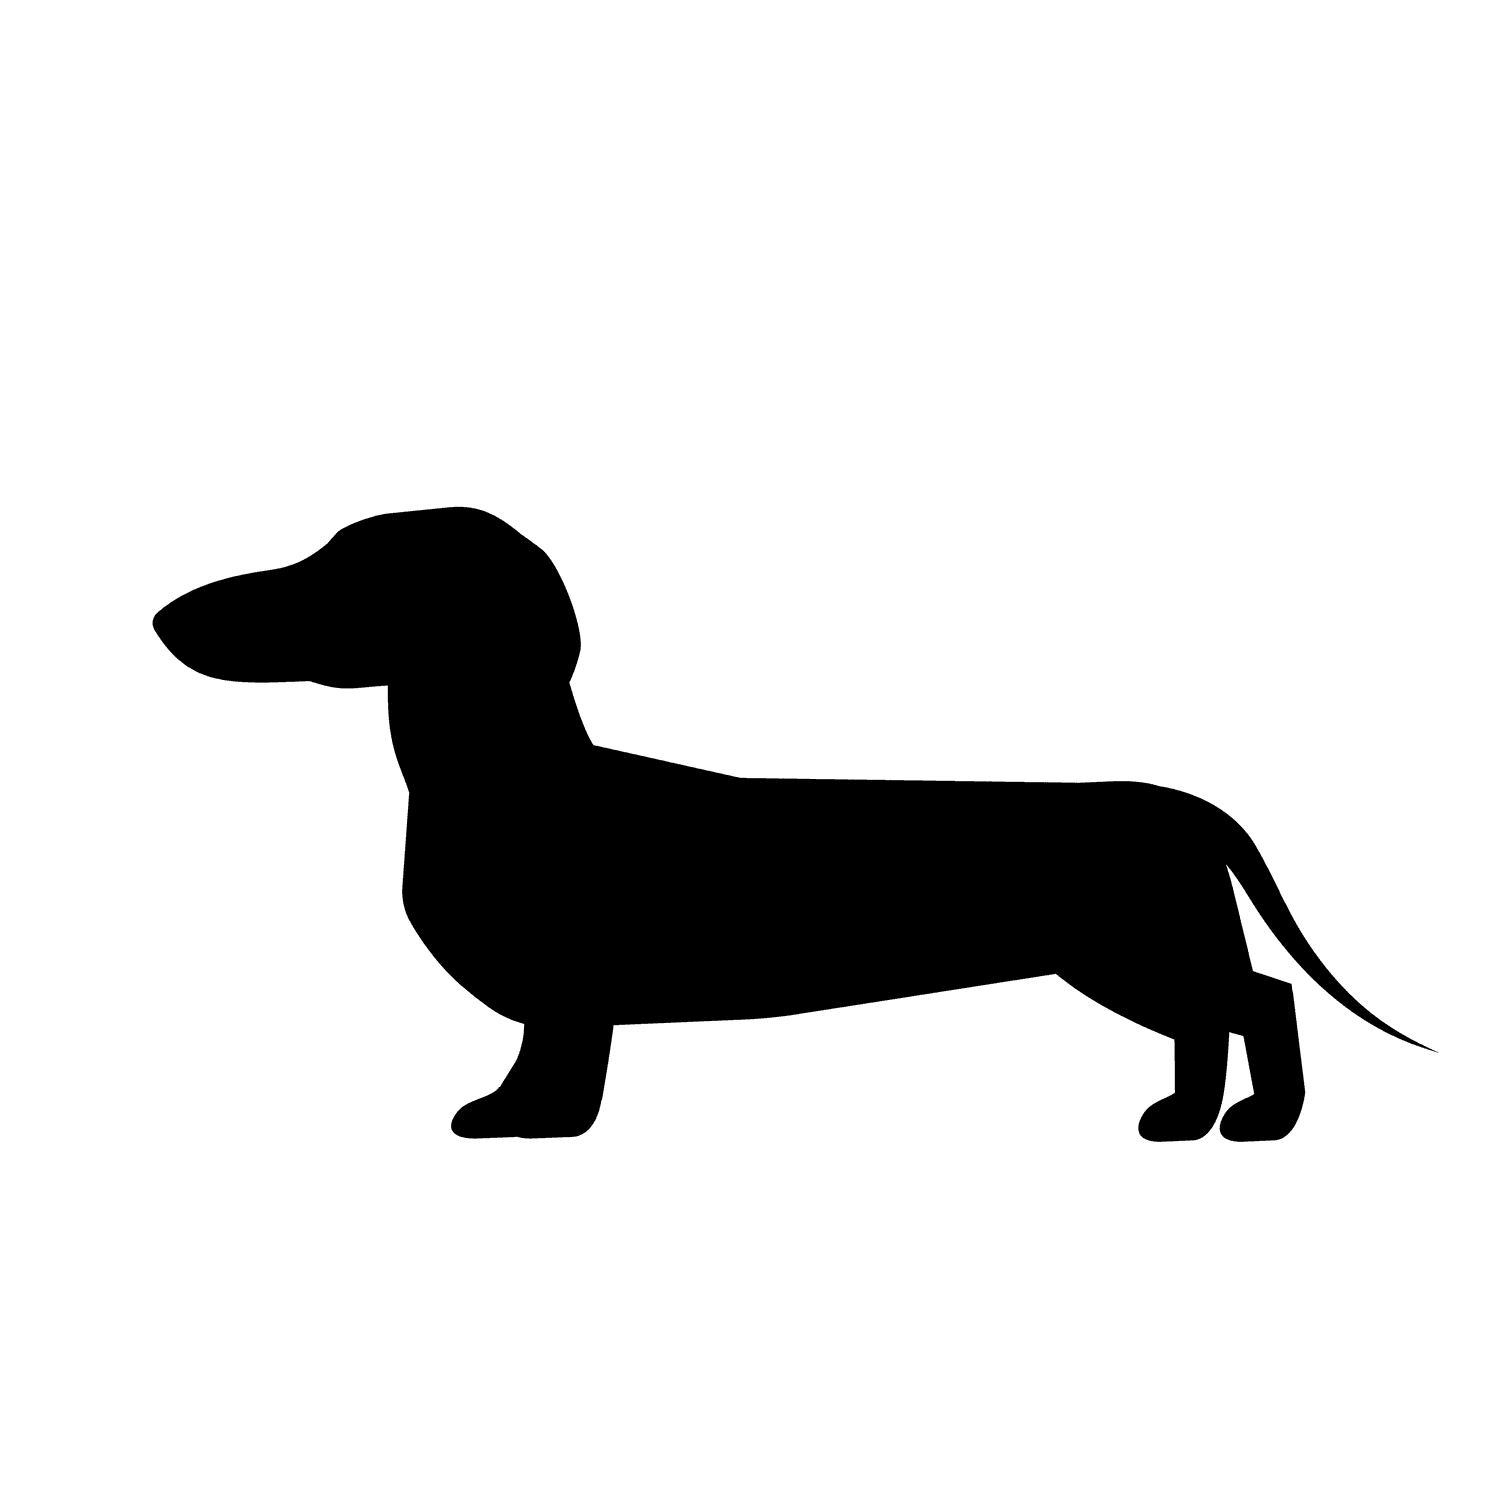 dogs silhouette black dogs clipart